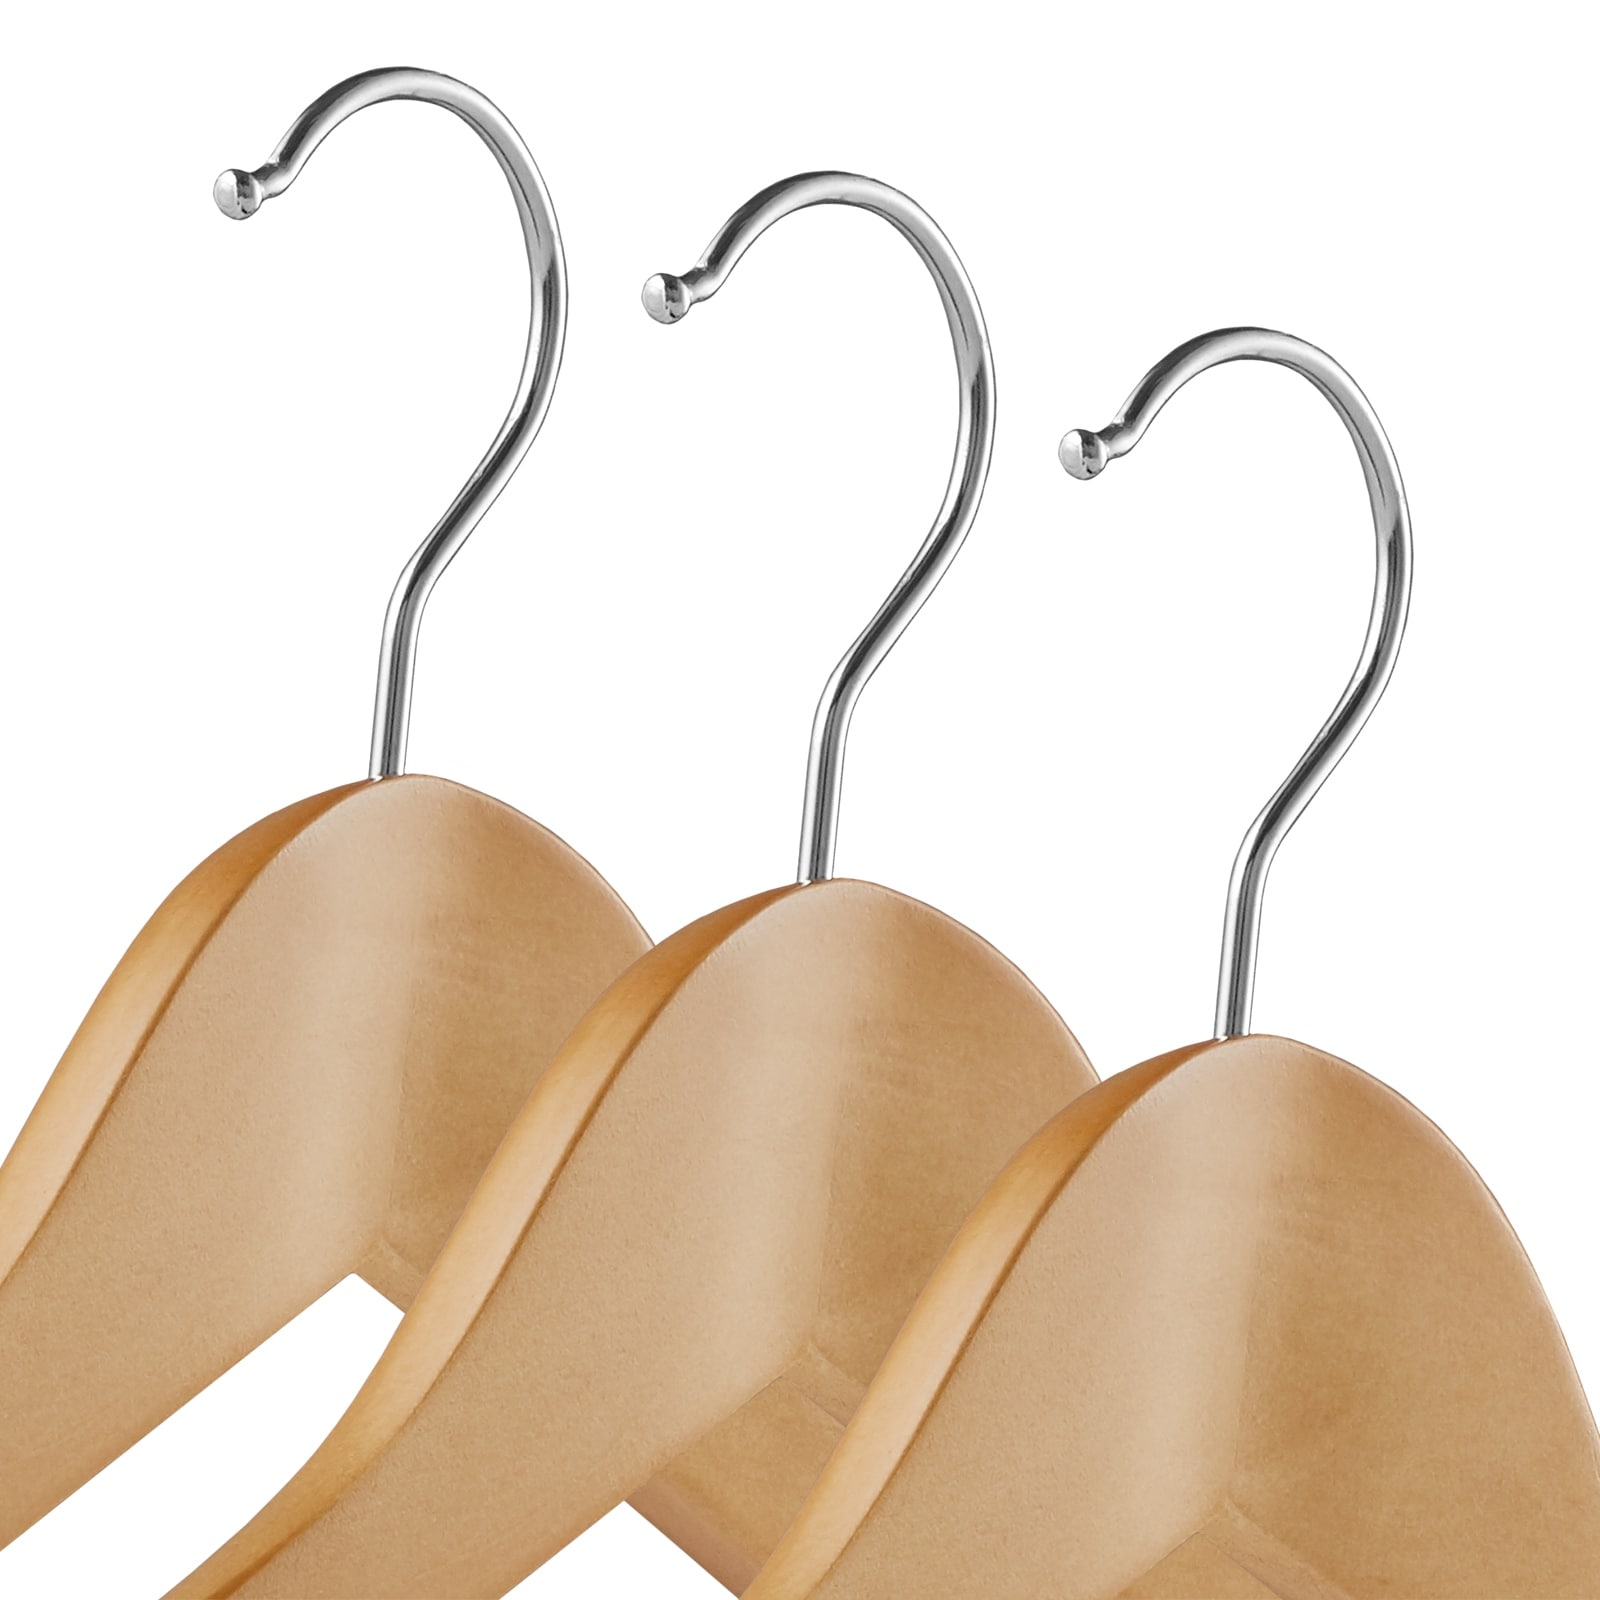 https://ak1.ostkcdn.com/images/products/is/images/direct/550e3589f5bdde5109b8b29a6a5cb5d83a7bba32/6-Pack-Wide-Shoulder-Wooden-Suit-Hangers-by-Casafield.jpg